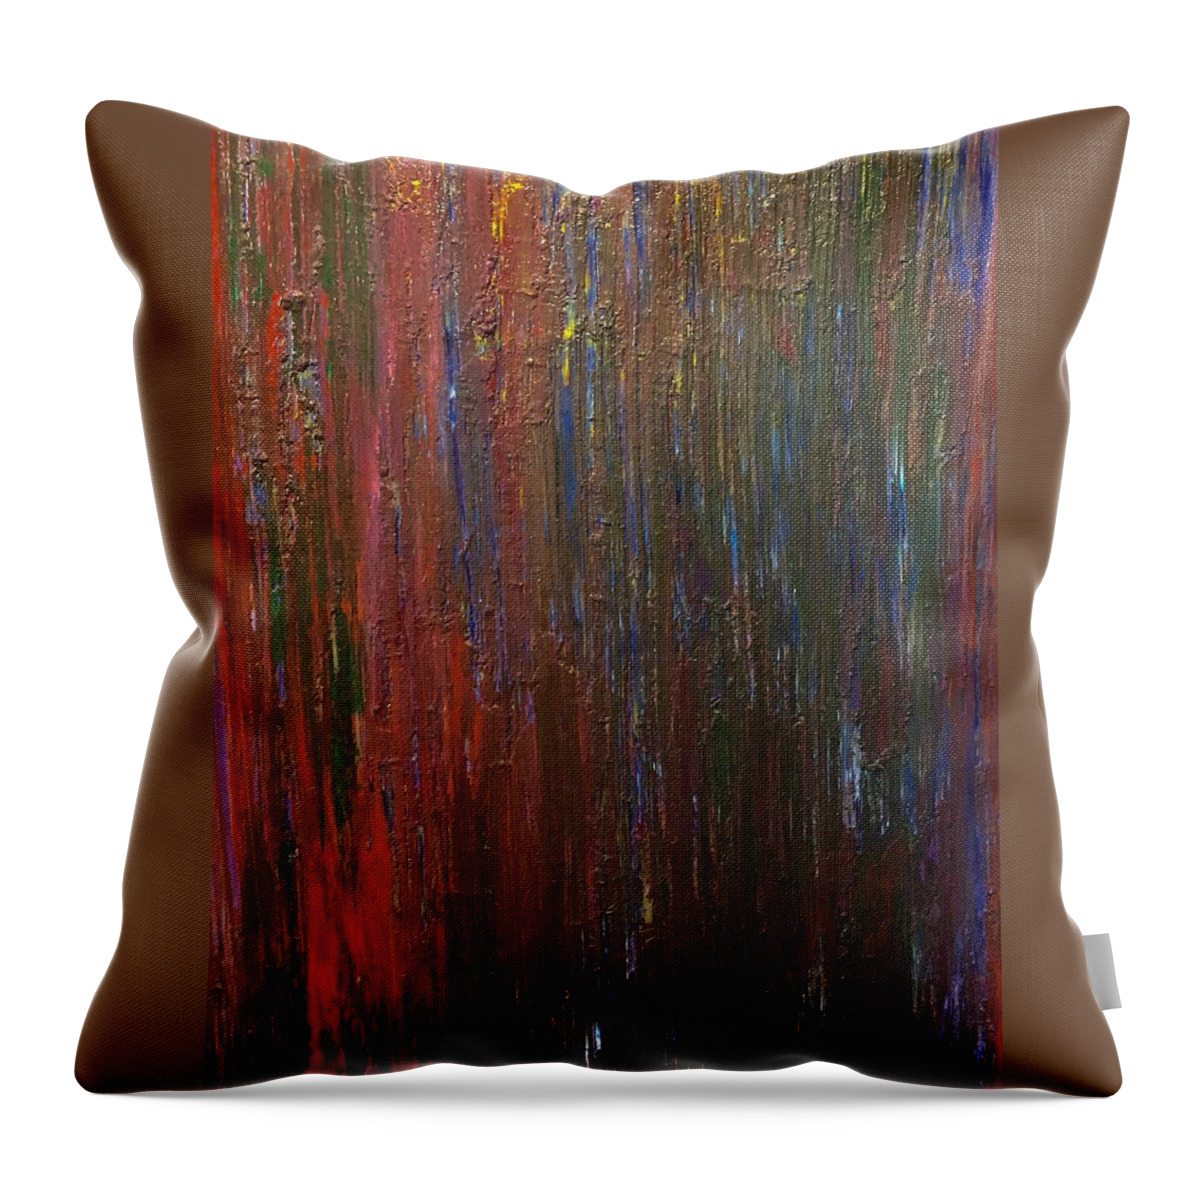  Throw Pillow featuring the painting 9 #1 by Greg Powell